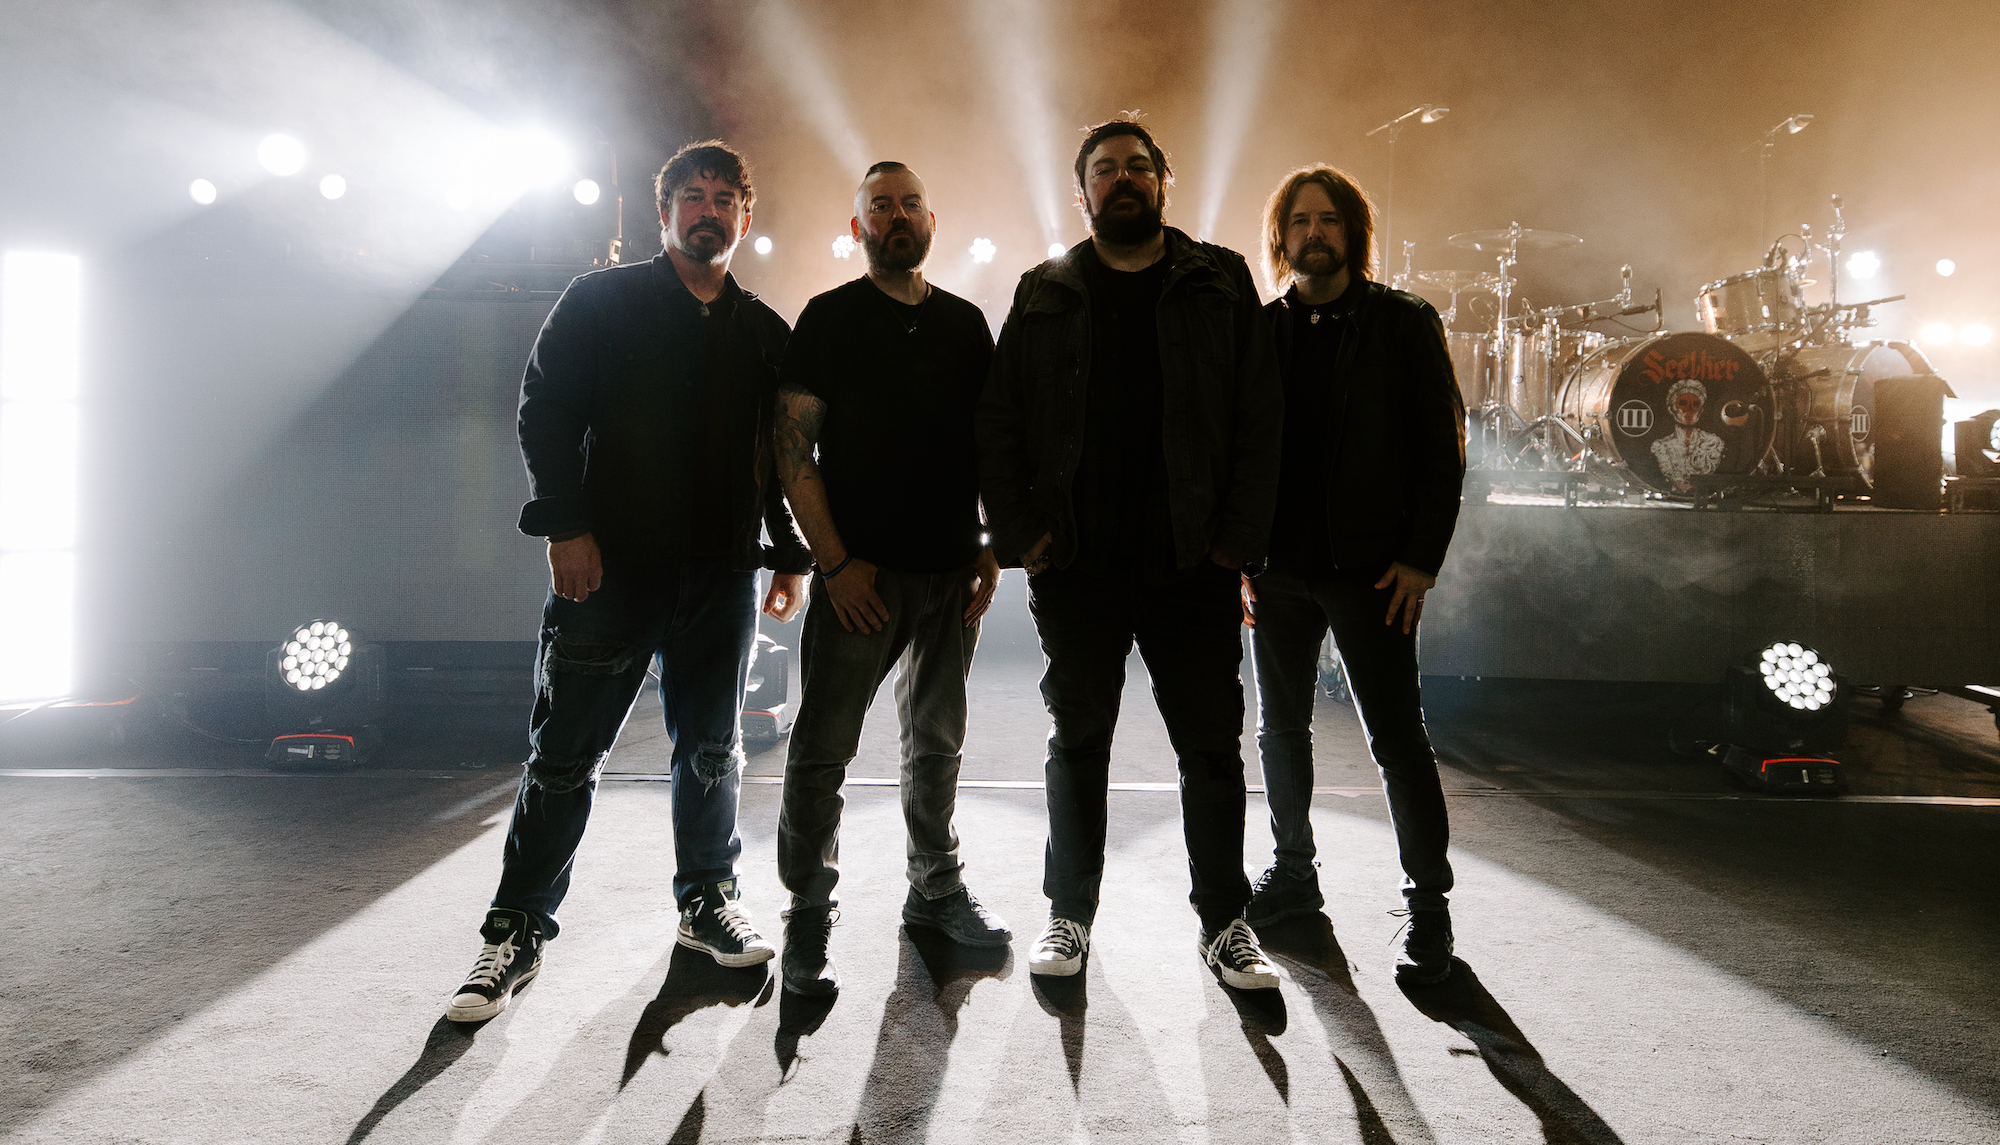 Morgan and the rest of Seether may be the most Nirvana-based band in music. (Photo by Rachel Deeb)